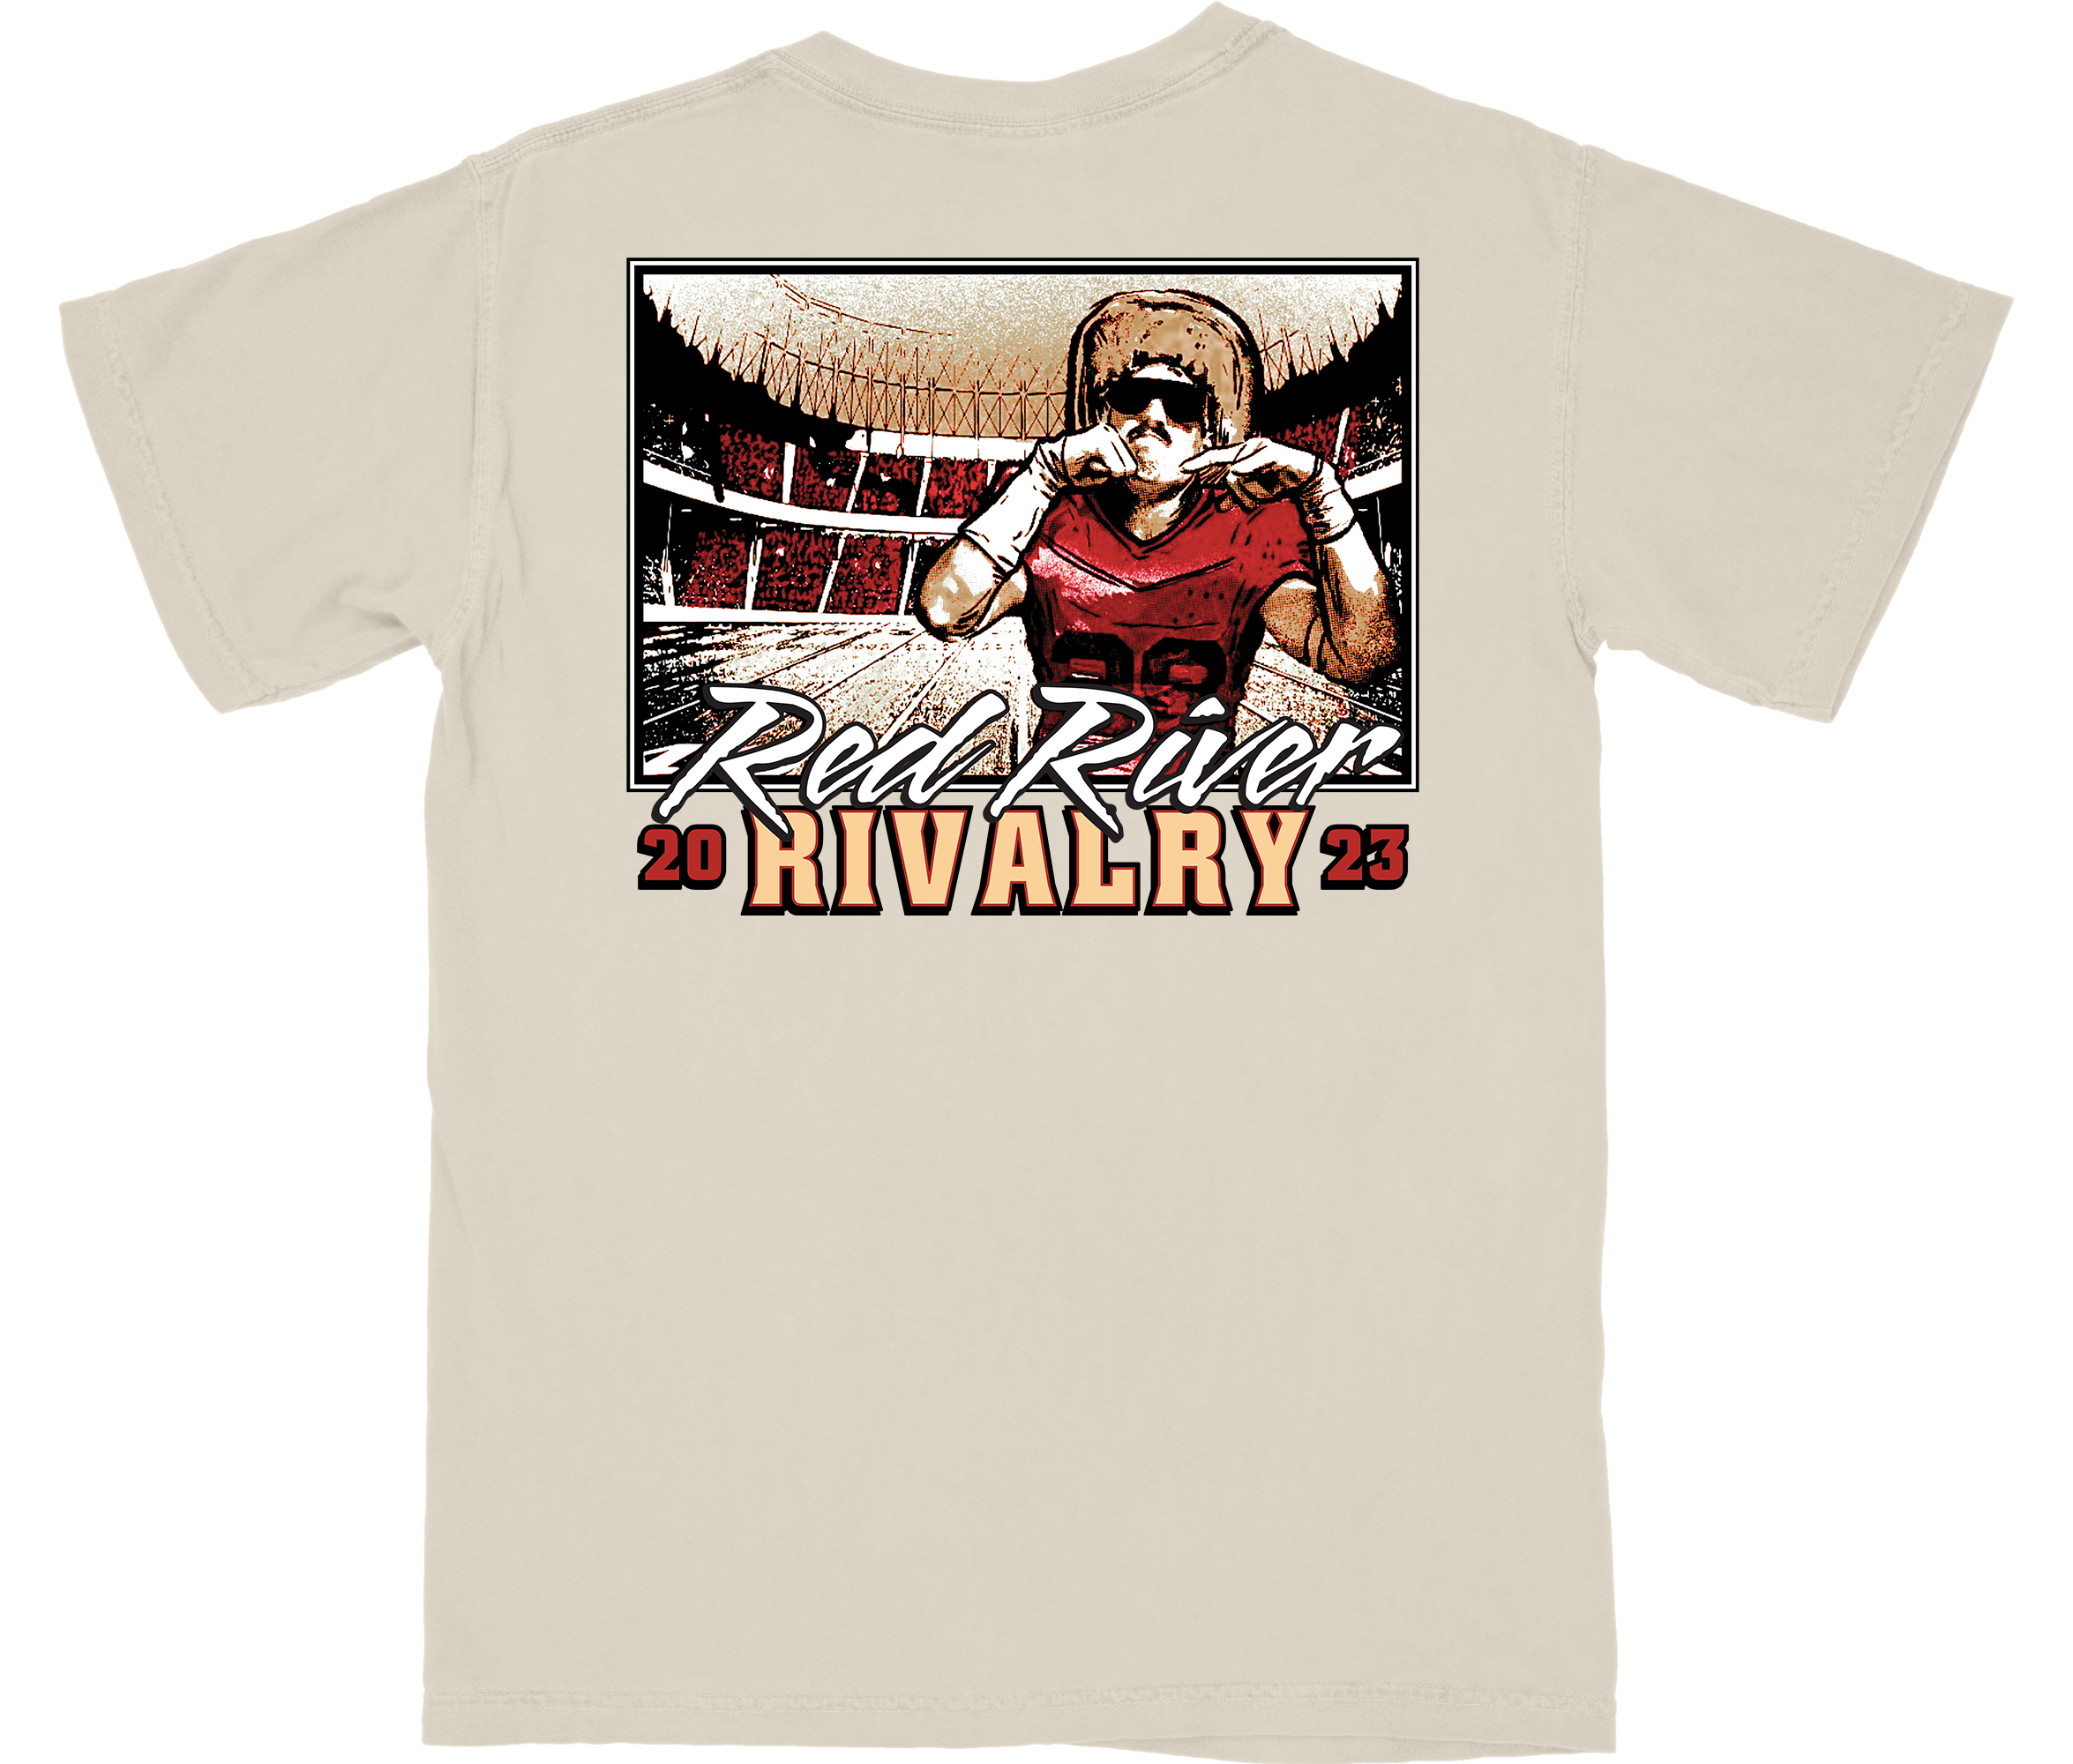 Red River Rivalry Shirt